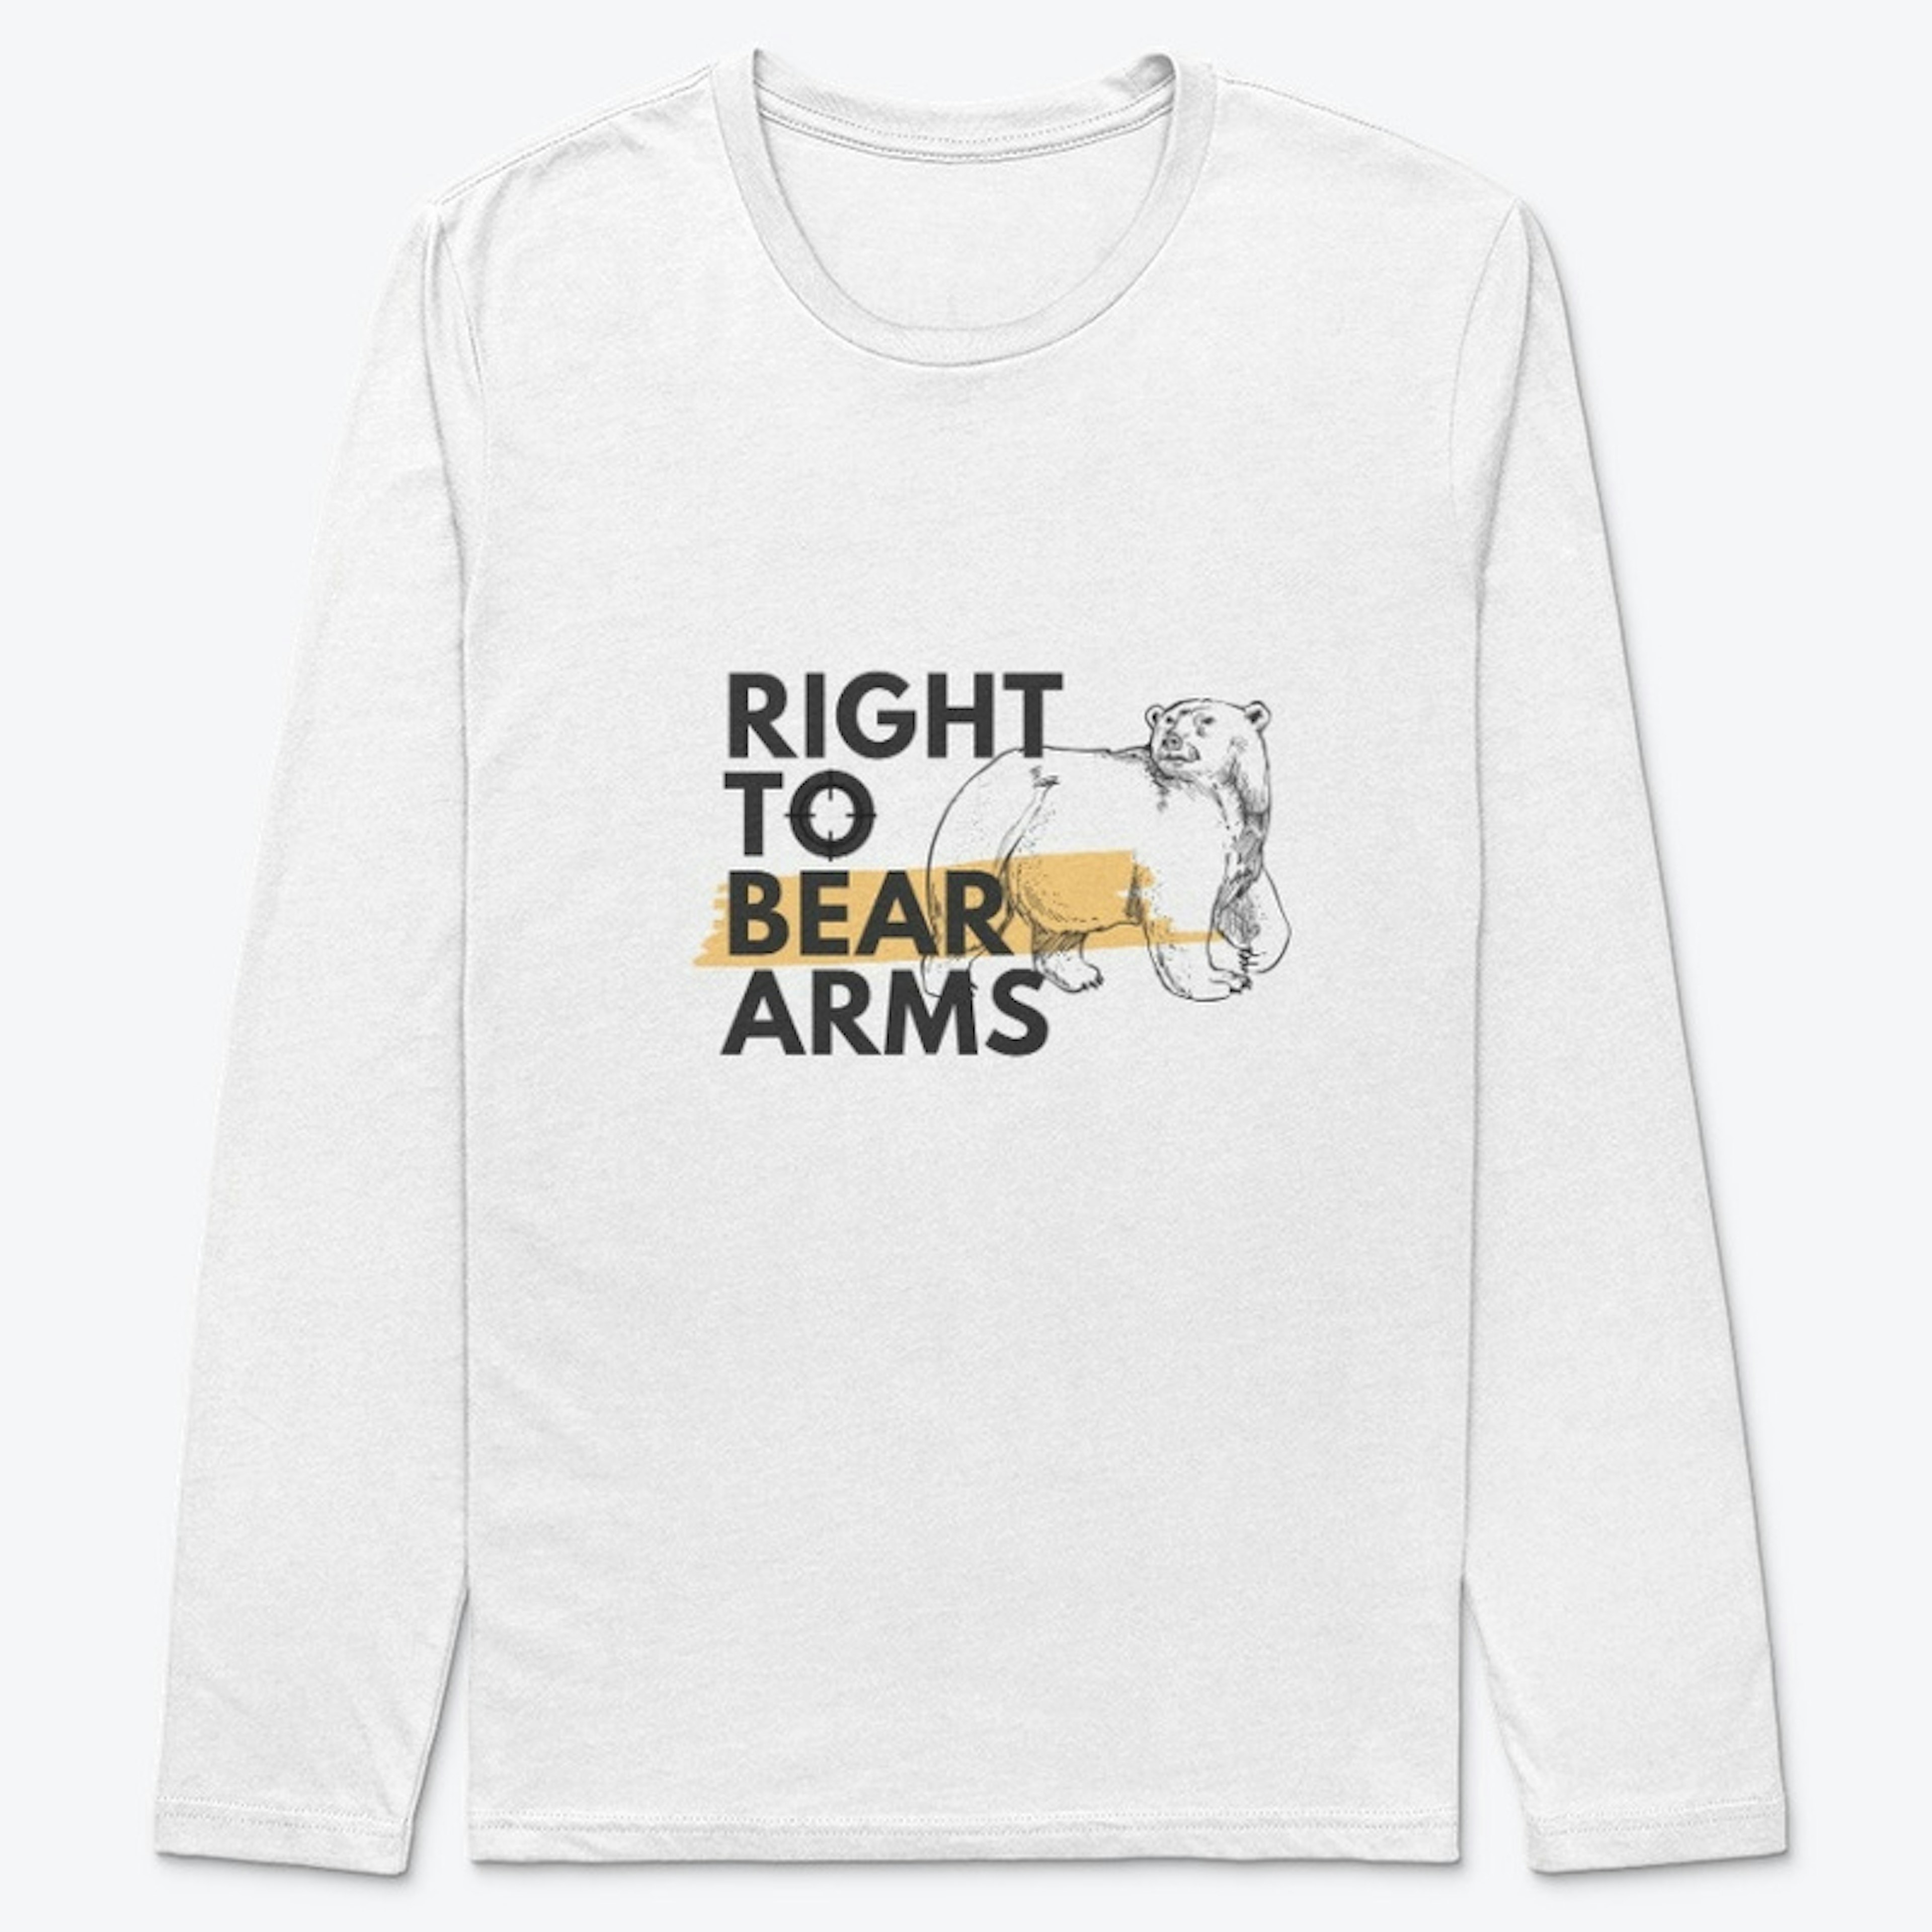 Keep and Bear Arms Collection